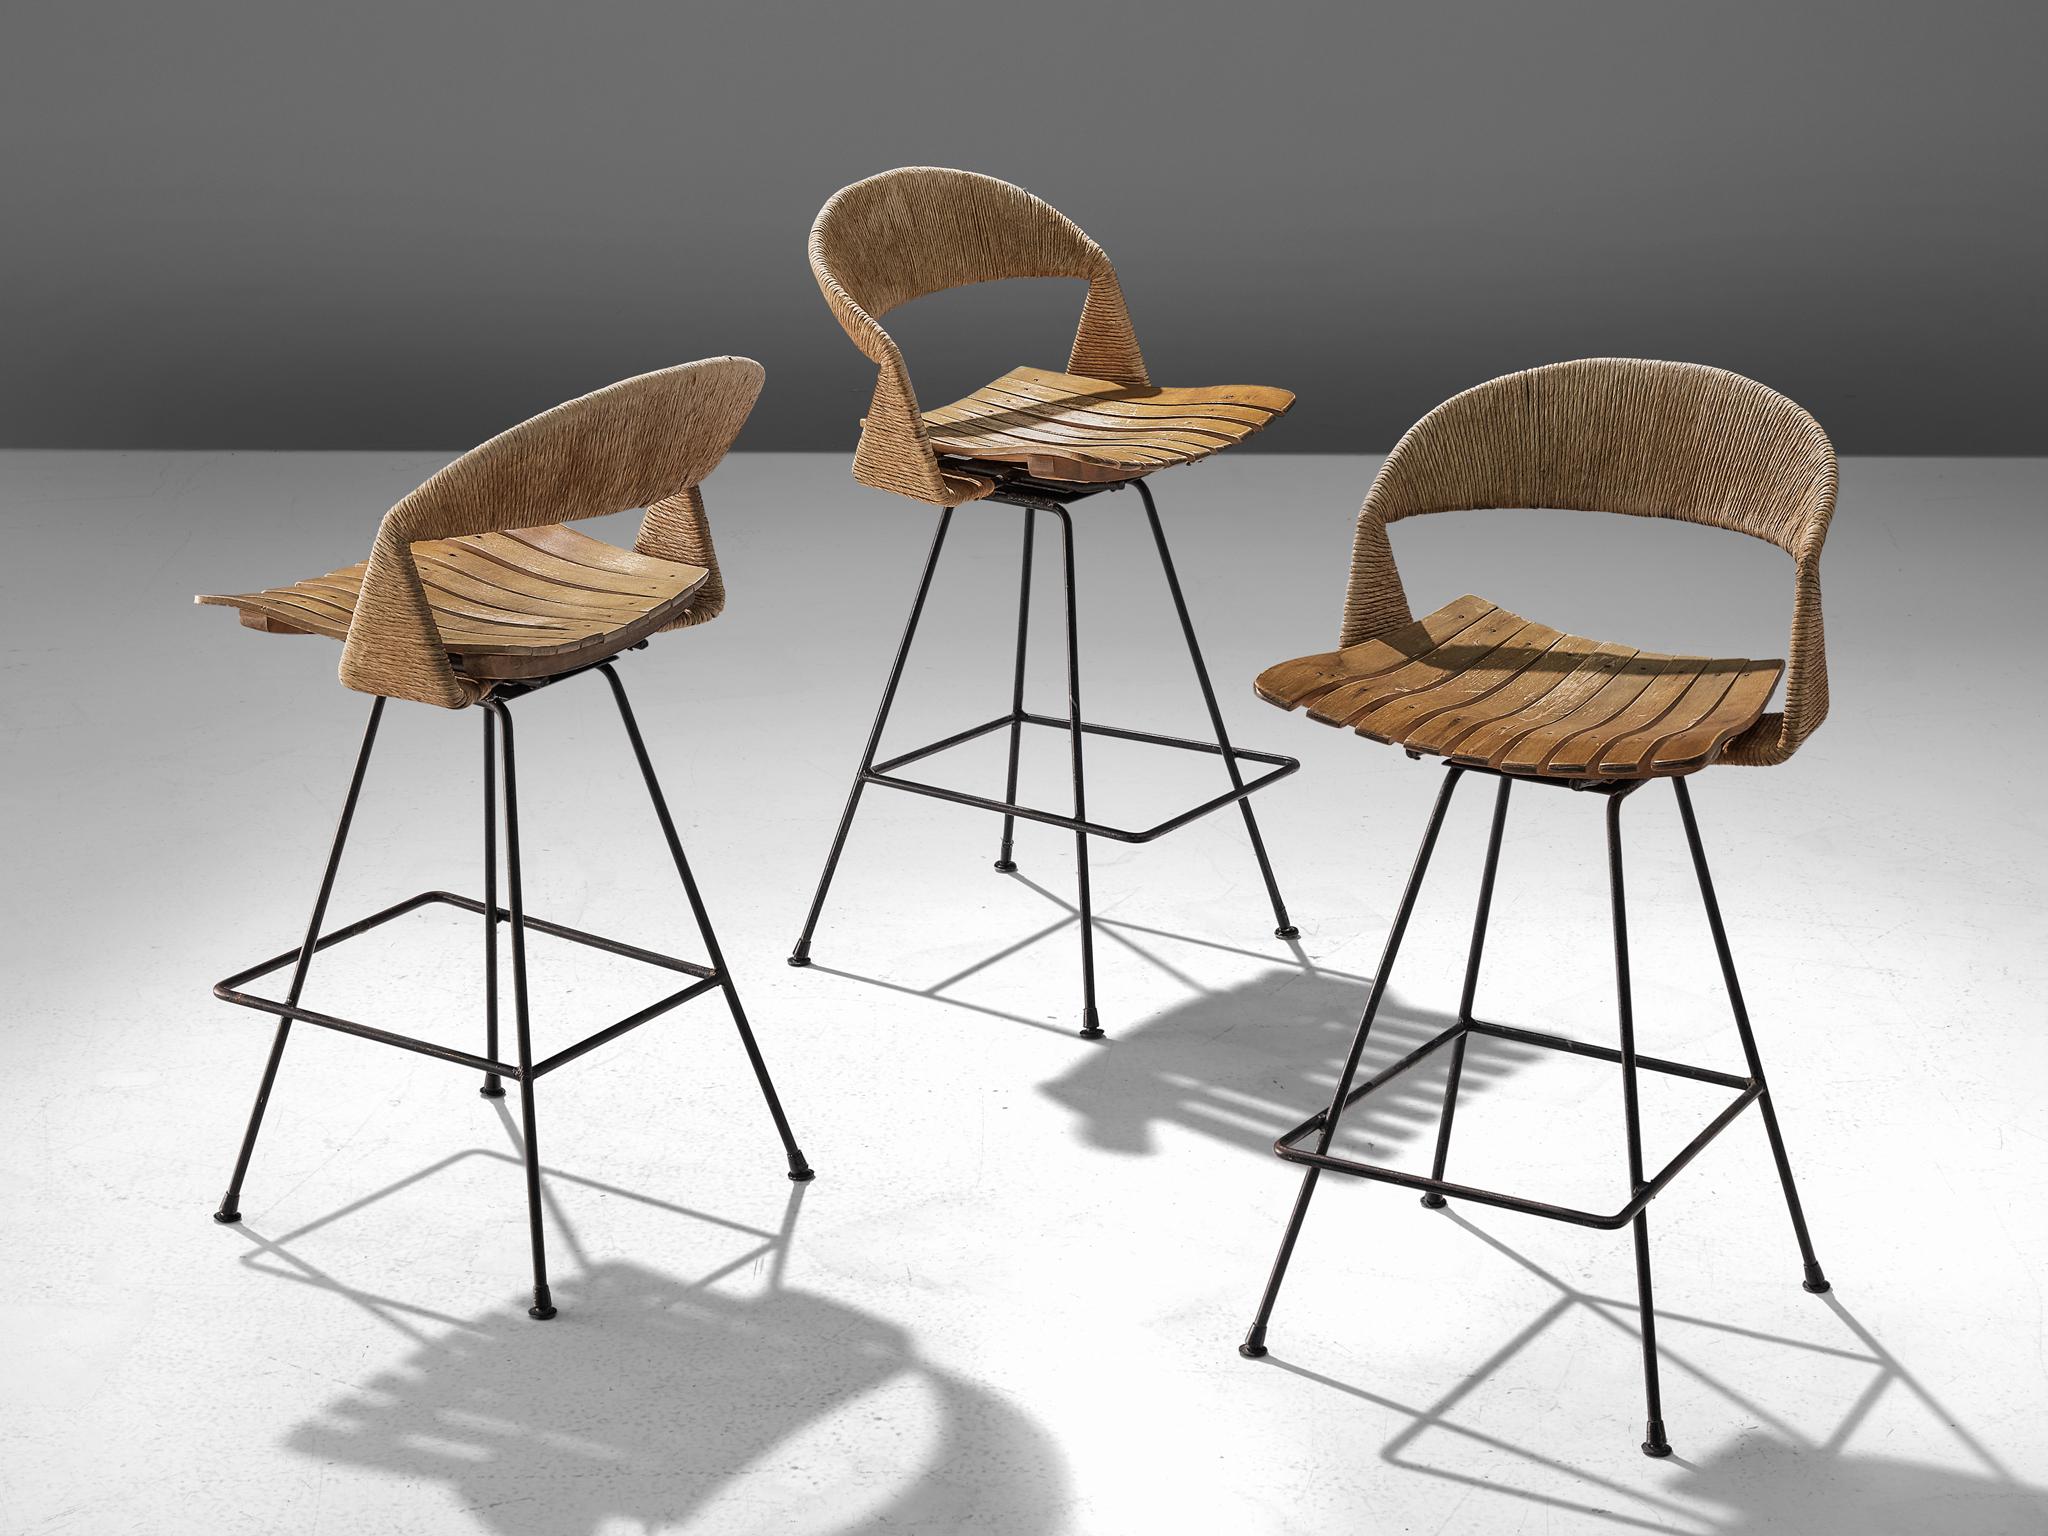 Arthur Umanoff for Raymore, set three bar stools, iron, cane and plywood, United States, 1950s

A set of three barstools by Arthur Umanoff for Raymor. The stools consist of an iron base with a squared frame for the sitter to rest their feet. The